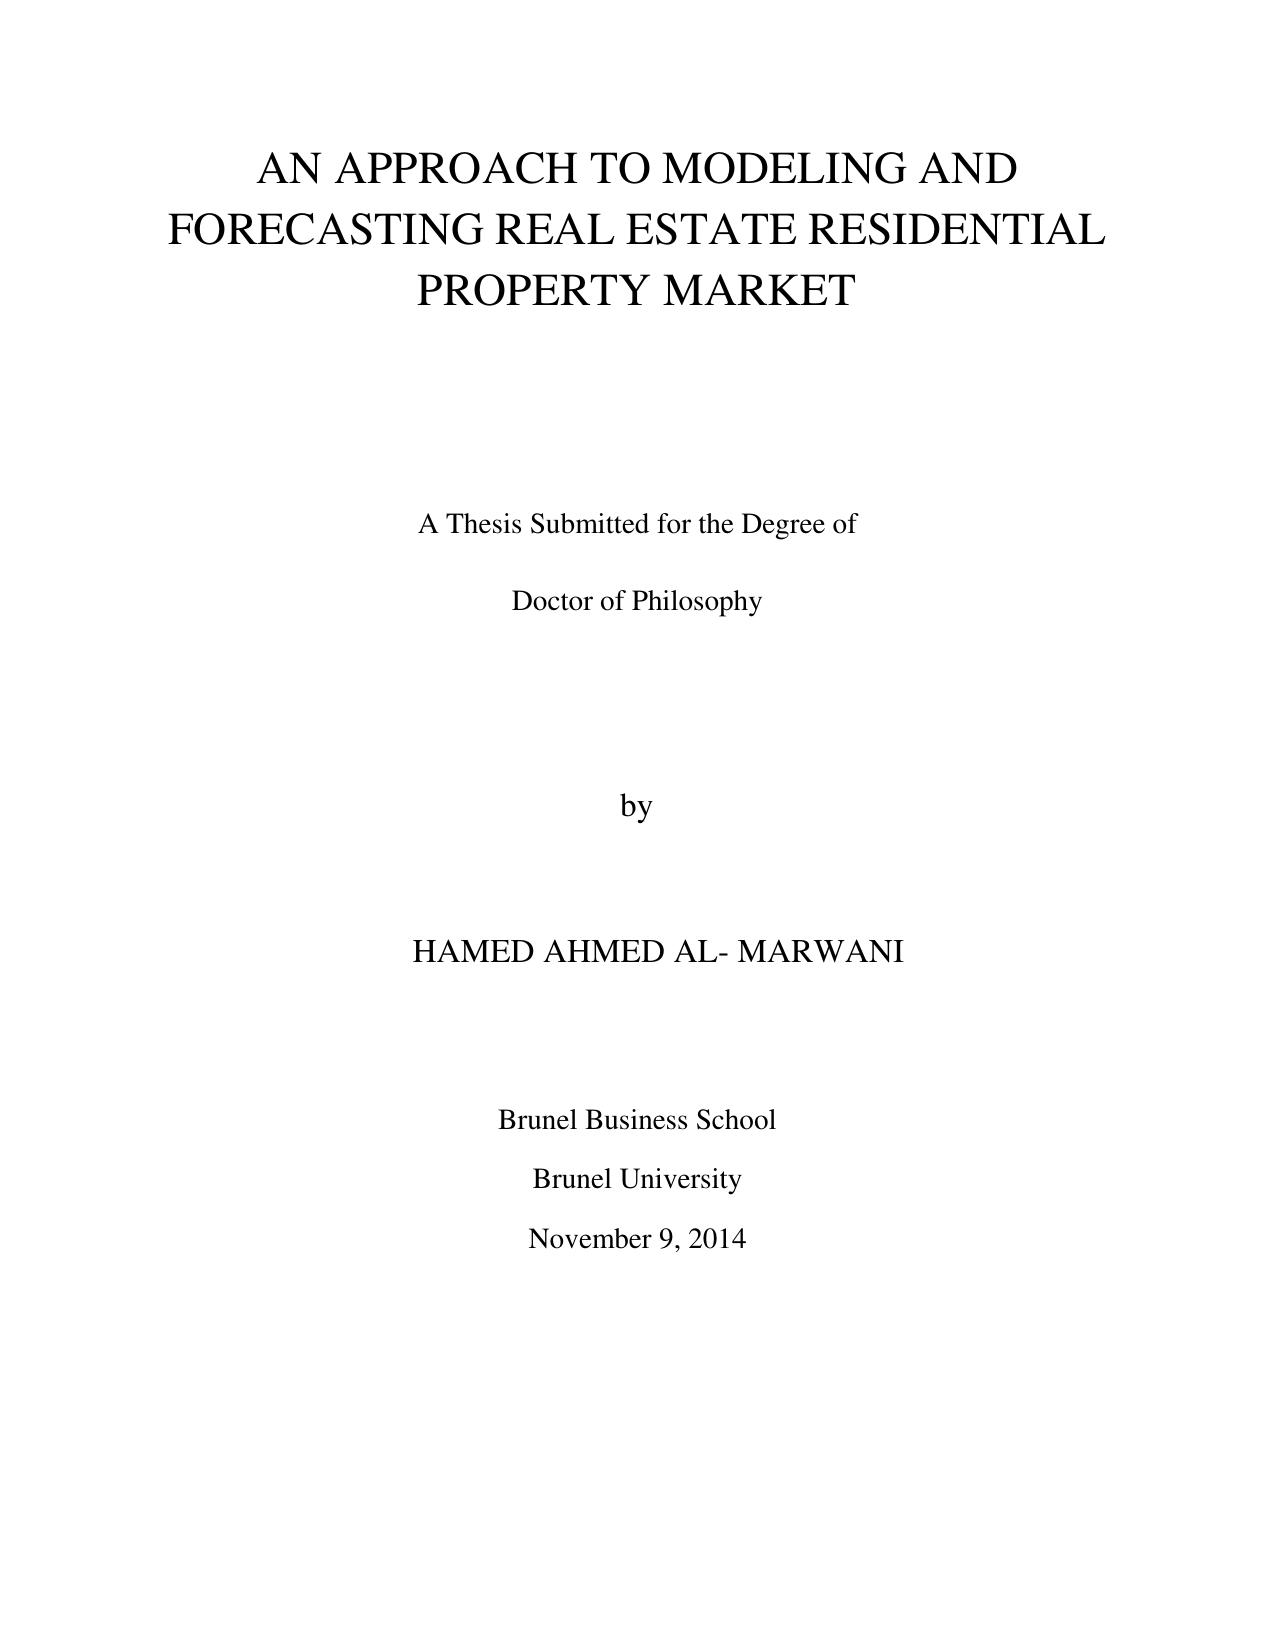 MODELING AND FORECASTING REAL ESTATE  2014